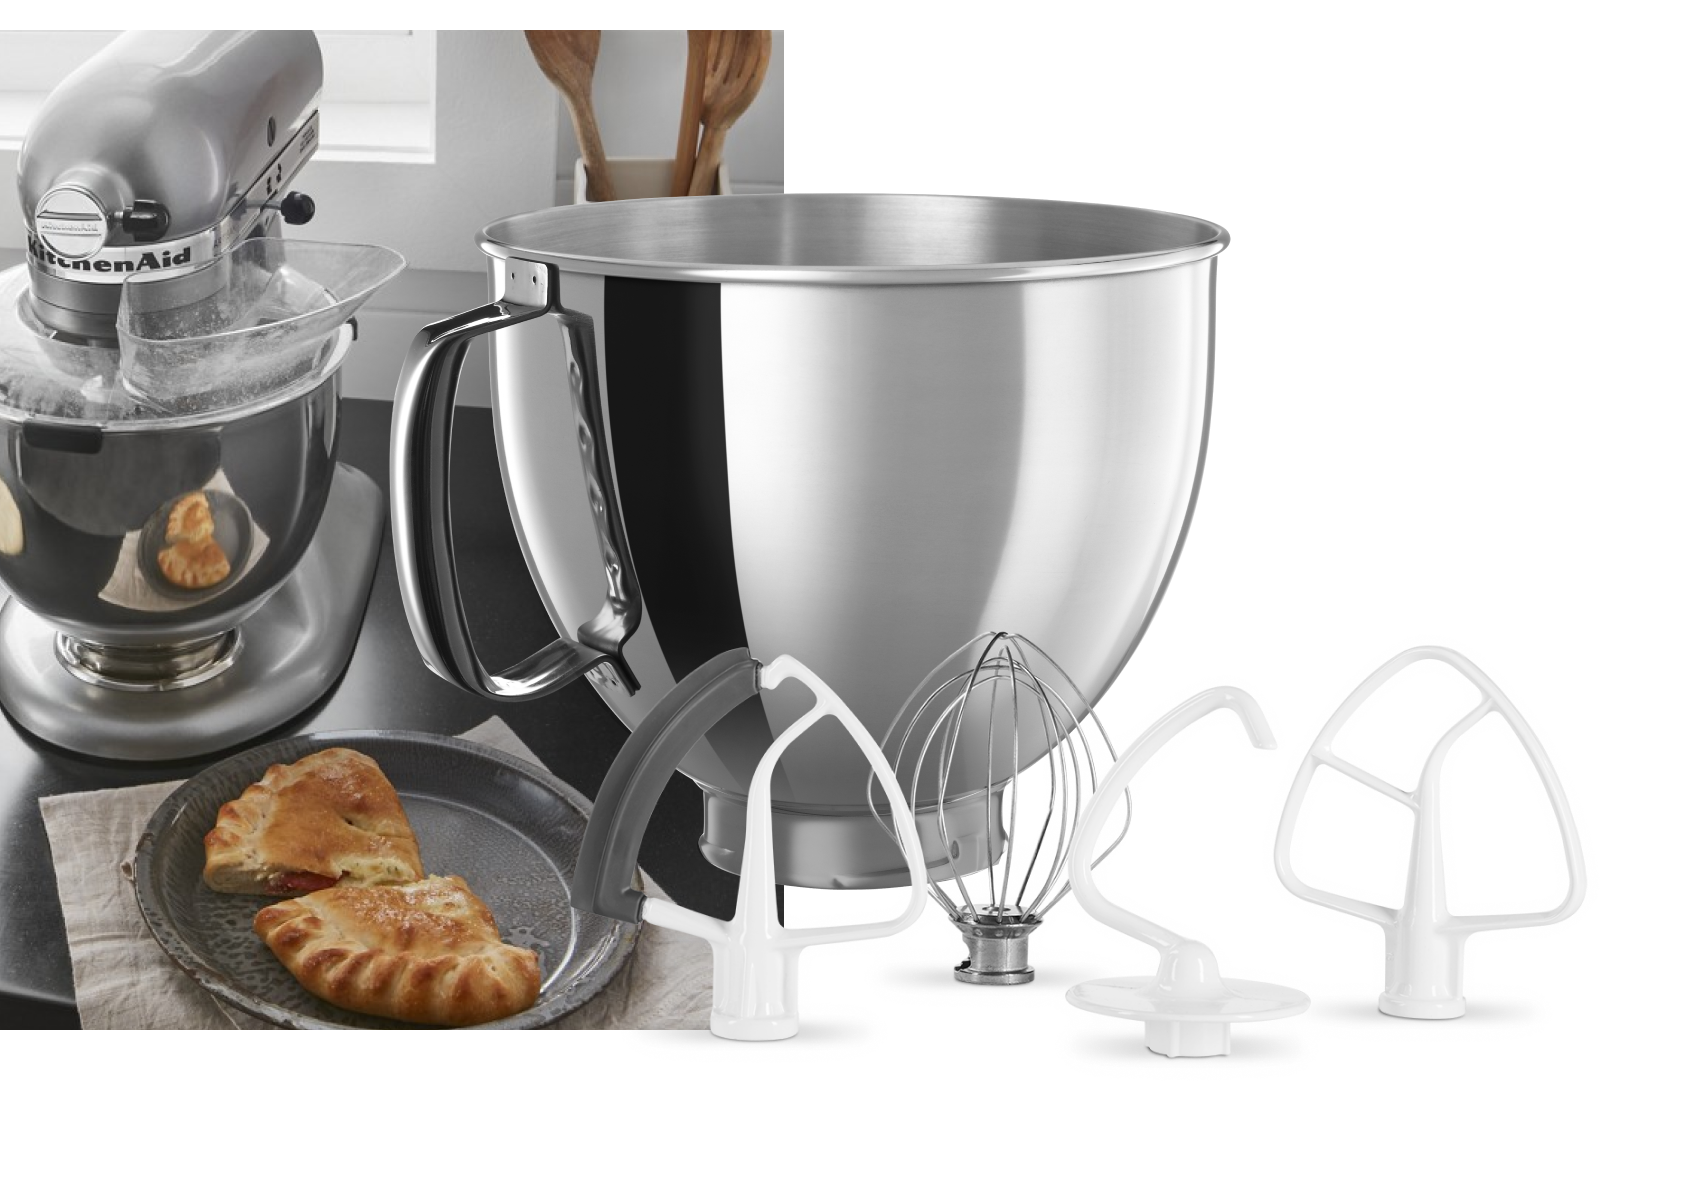 A stainless steel bowl, edge beater, whip, dough hook, flat beater, spiral hook and pastry beater.